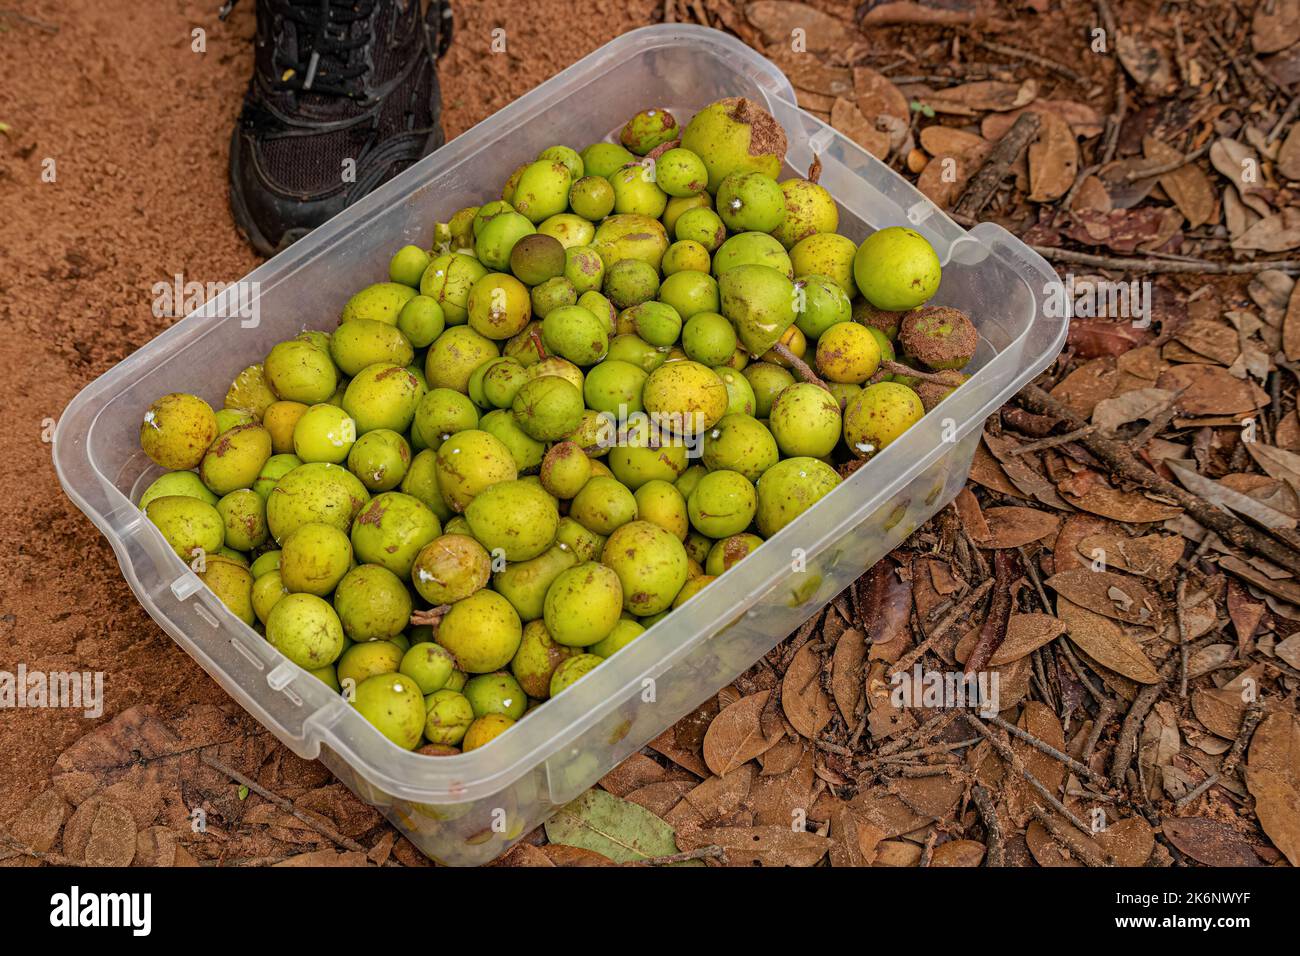 fruits called Mangaba collected in a plastic container Stock Photo